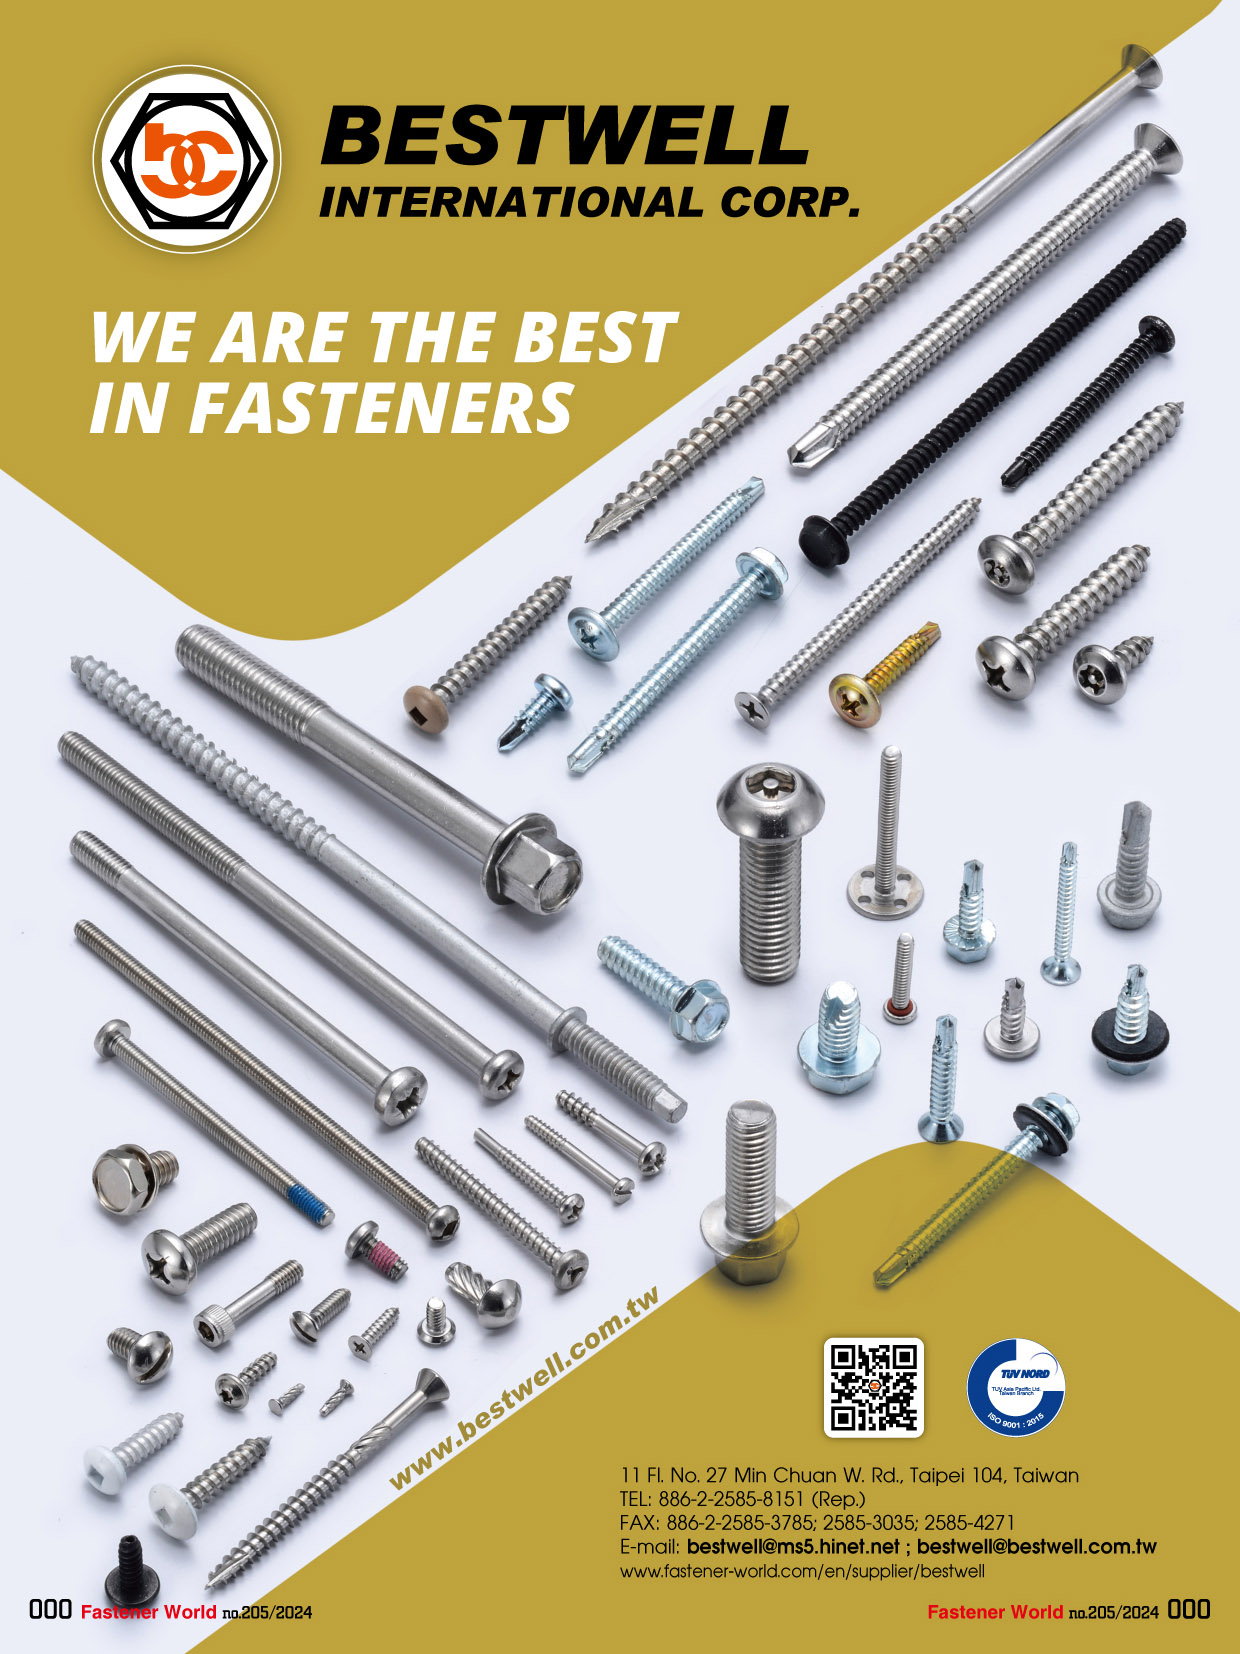 BESTWELL INTERNATIONAL CORP.  , HEX BOLT, SQUARE BOLT, CARRIAGE BOLT, FLANGE BOLT, SOCKET HEAD CAP SCREW, SET SCREW, SHACKLE BOLT, CUP BOLT, ALL THREAD STUD, OVAL NECK, SQUARE NECK, GAS BOLT, T-HEAD BOLT, SINGLE END STUD, T/S & M/S, SELF DRILLING SCREW, DWS & CHIPBOARD SCREW, SCREW WITH BONDER WASHER, SECURITY SCREW, SEM SCREW, SEPCIAL SERRATION SCREW, NUT, LOCK NUT, TEFLON COATING NUT, NON-STANDARD & OTHERS, FLAT WASHER, LOCK WASHER, SQUARE WASHER, SOLID WASHER, ANCHOR, STAMPING, SPECIAL FASTENERS, D-RING & RINGS, CNC ITEMS, WIRE MESH, BUTT SEAM SPACER, PLASTIC OR RUBBER PARTS, POWDER METALLURGY, SPRING & CLIP